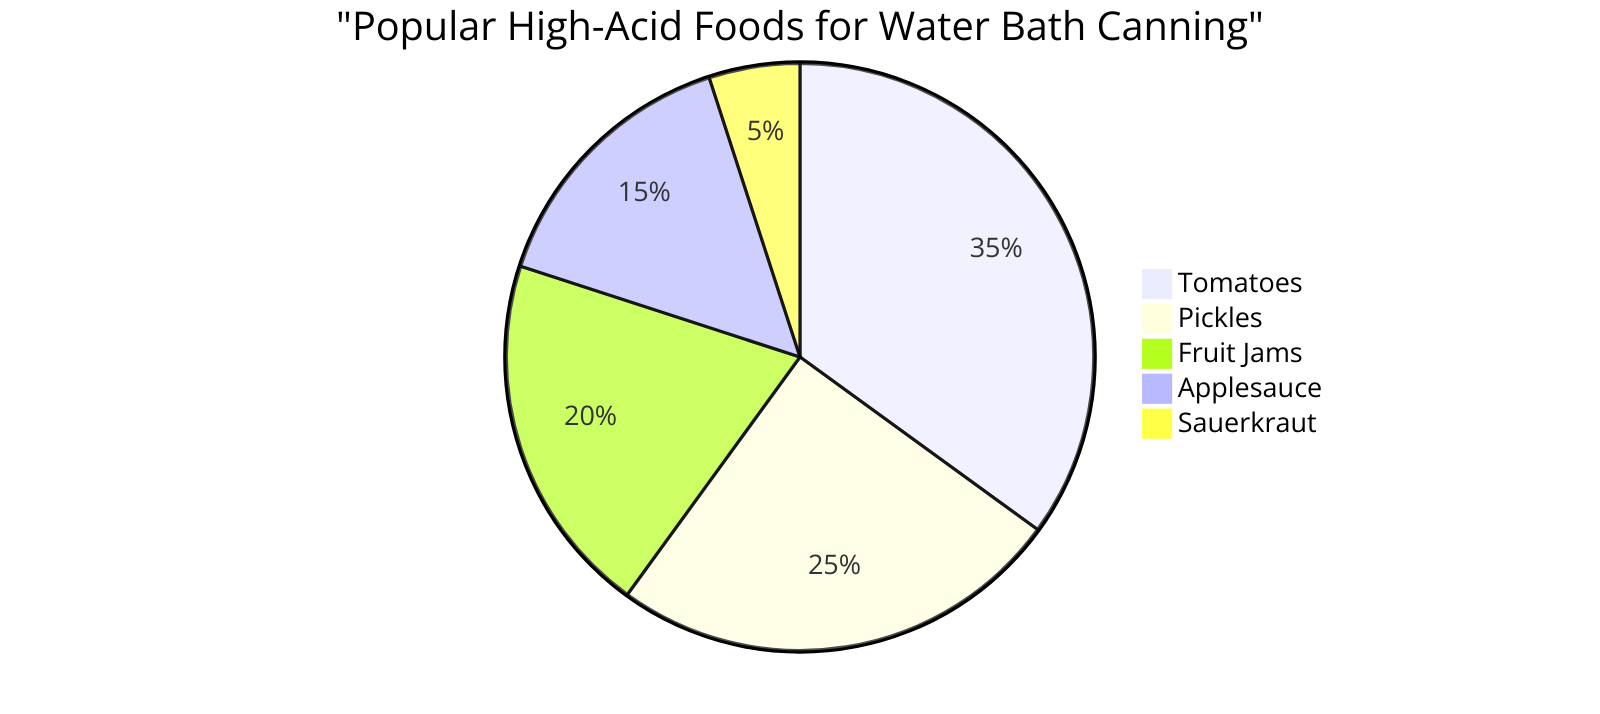  the percentage breakdown of popular high-acid foods chosen by beginners for water bath canning